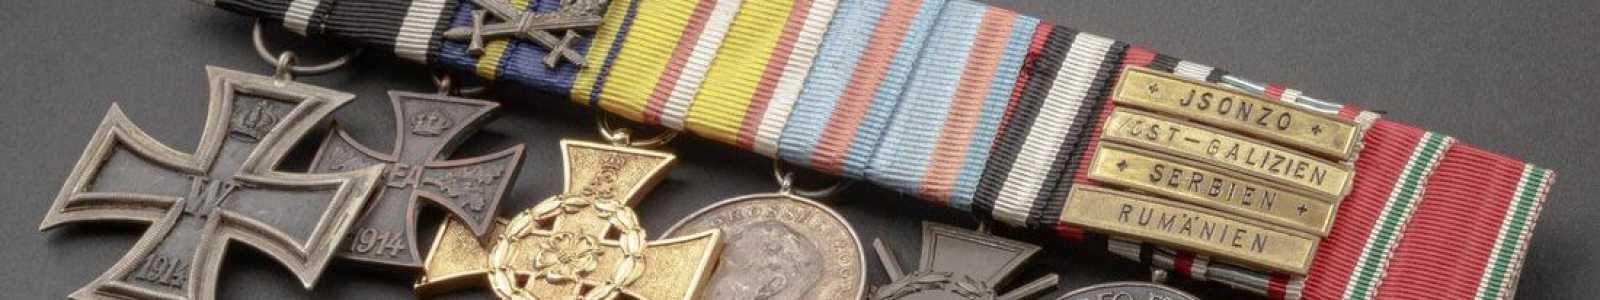 O82m - International medals & historical collections